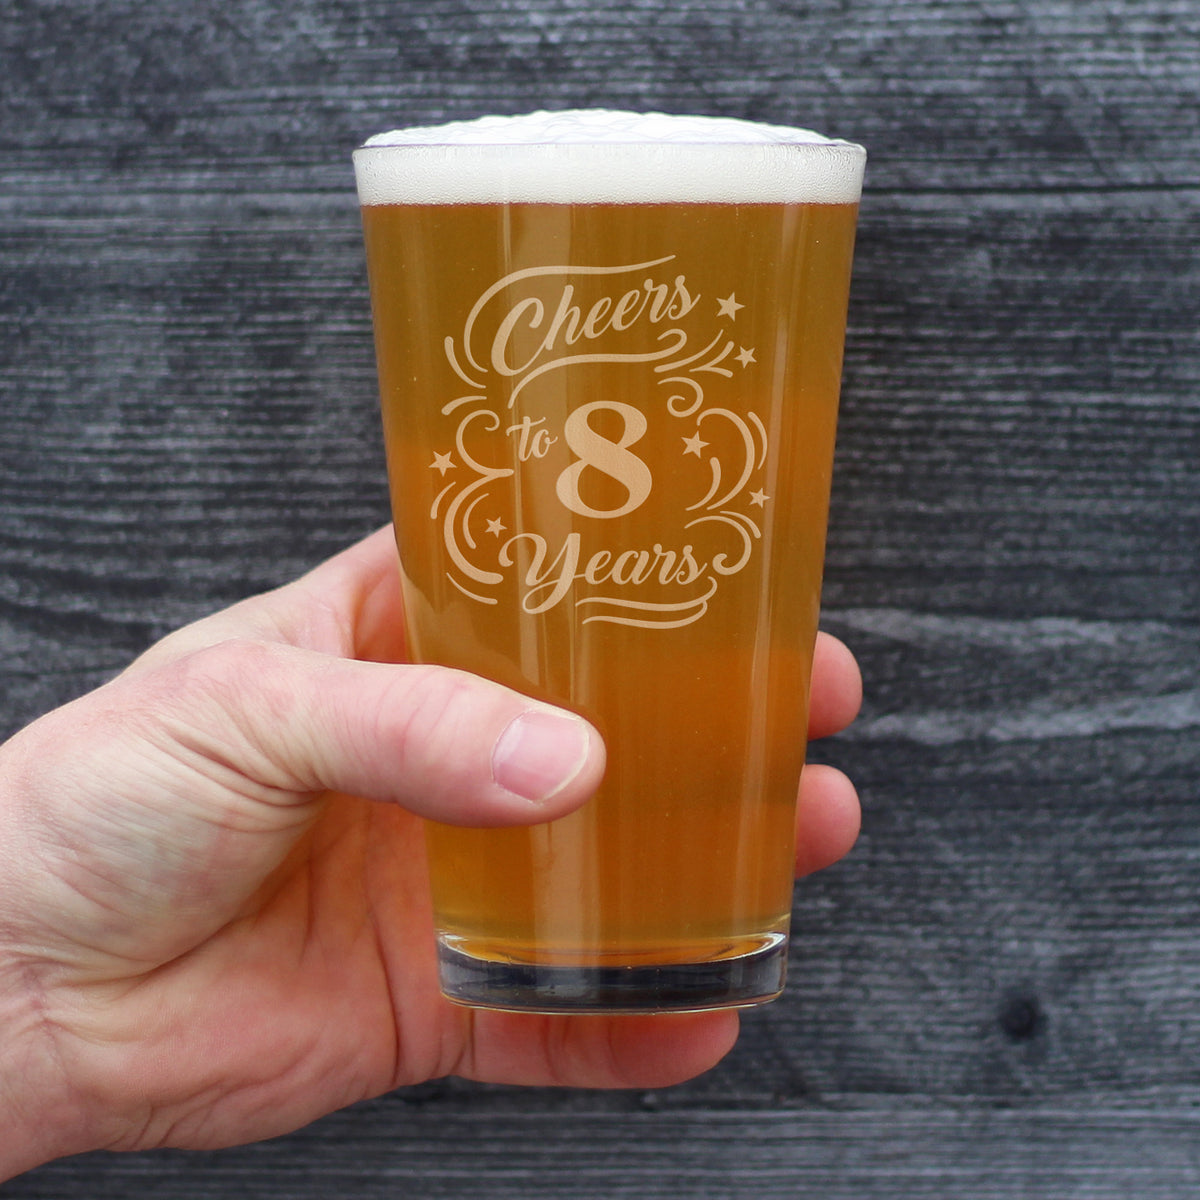 Cheers to 8 Years - Pint Glass for Beer - Gifts for Women &amp; Men - 8th Anniversary Party Decor - 16 Oz Glasses